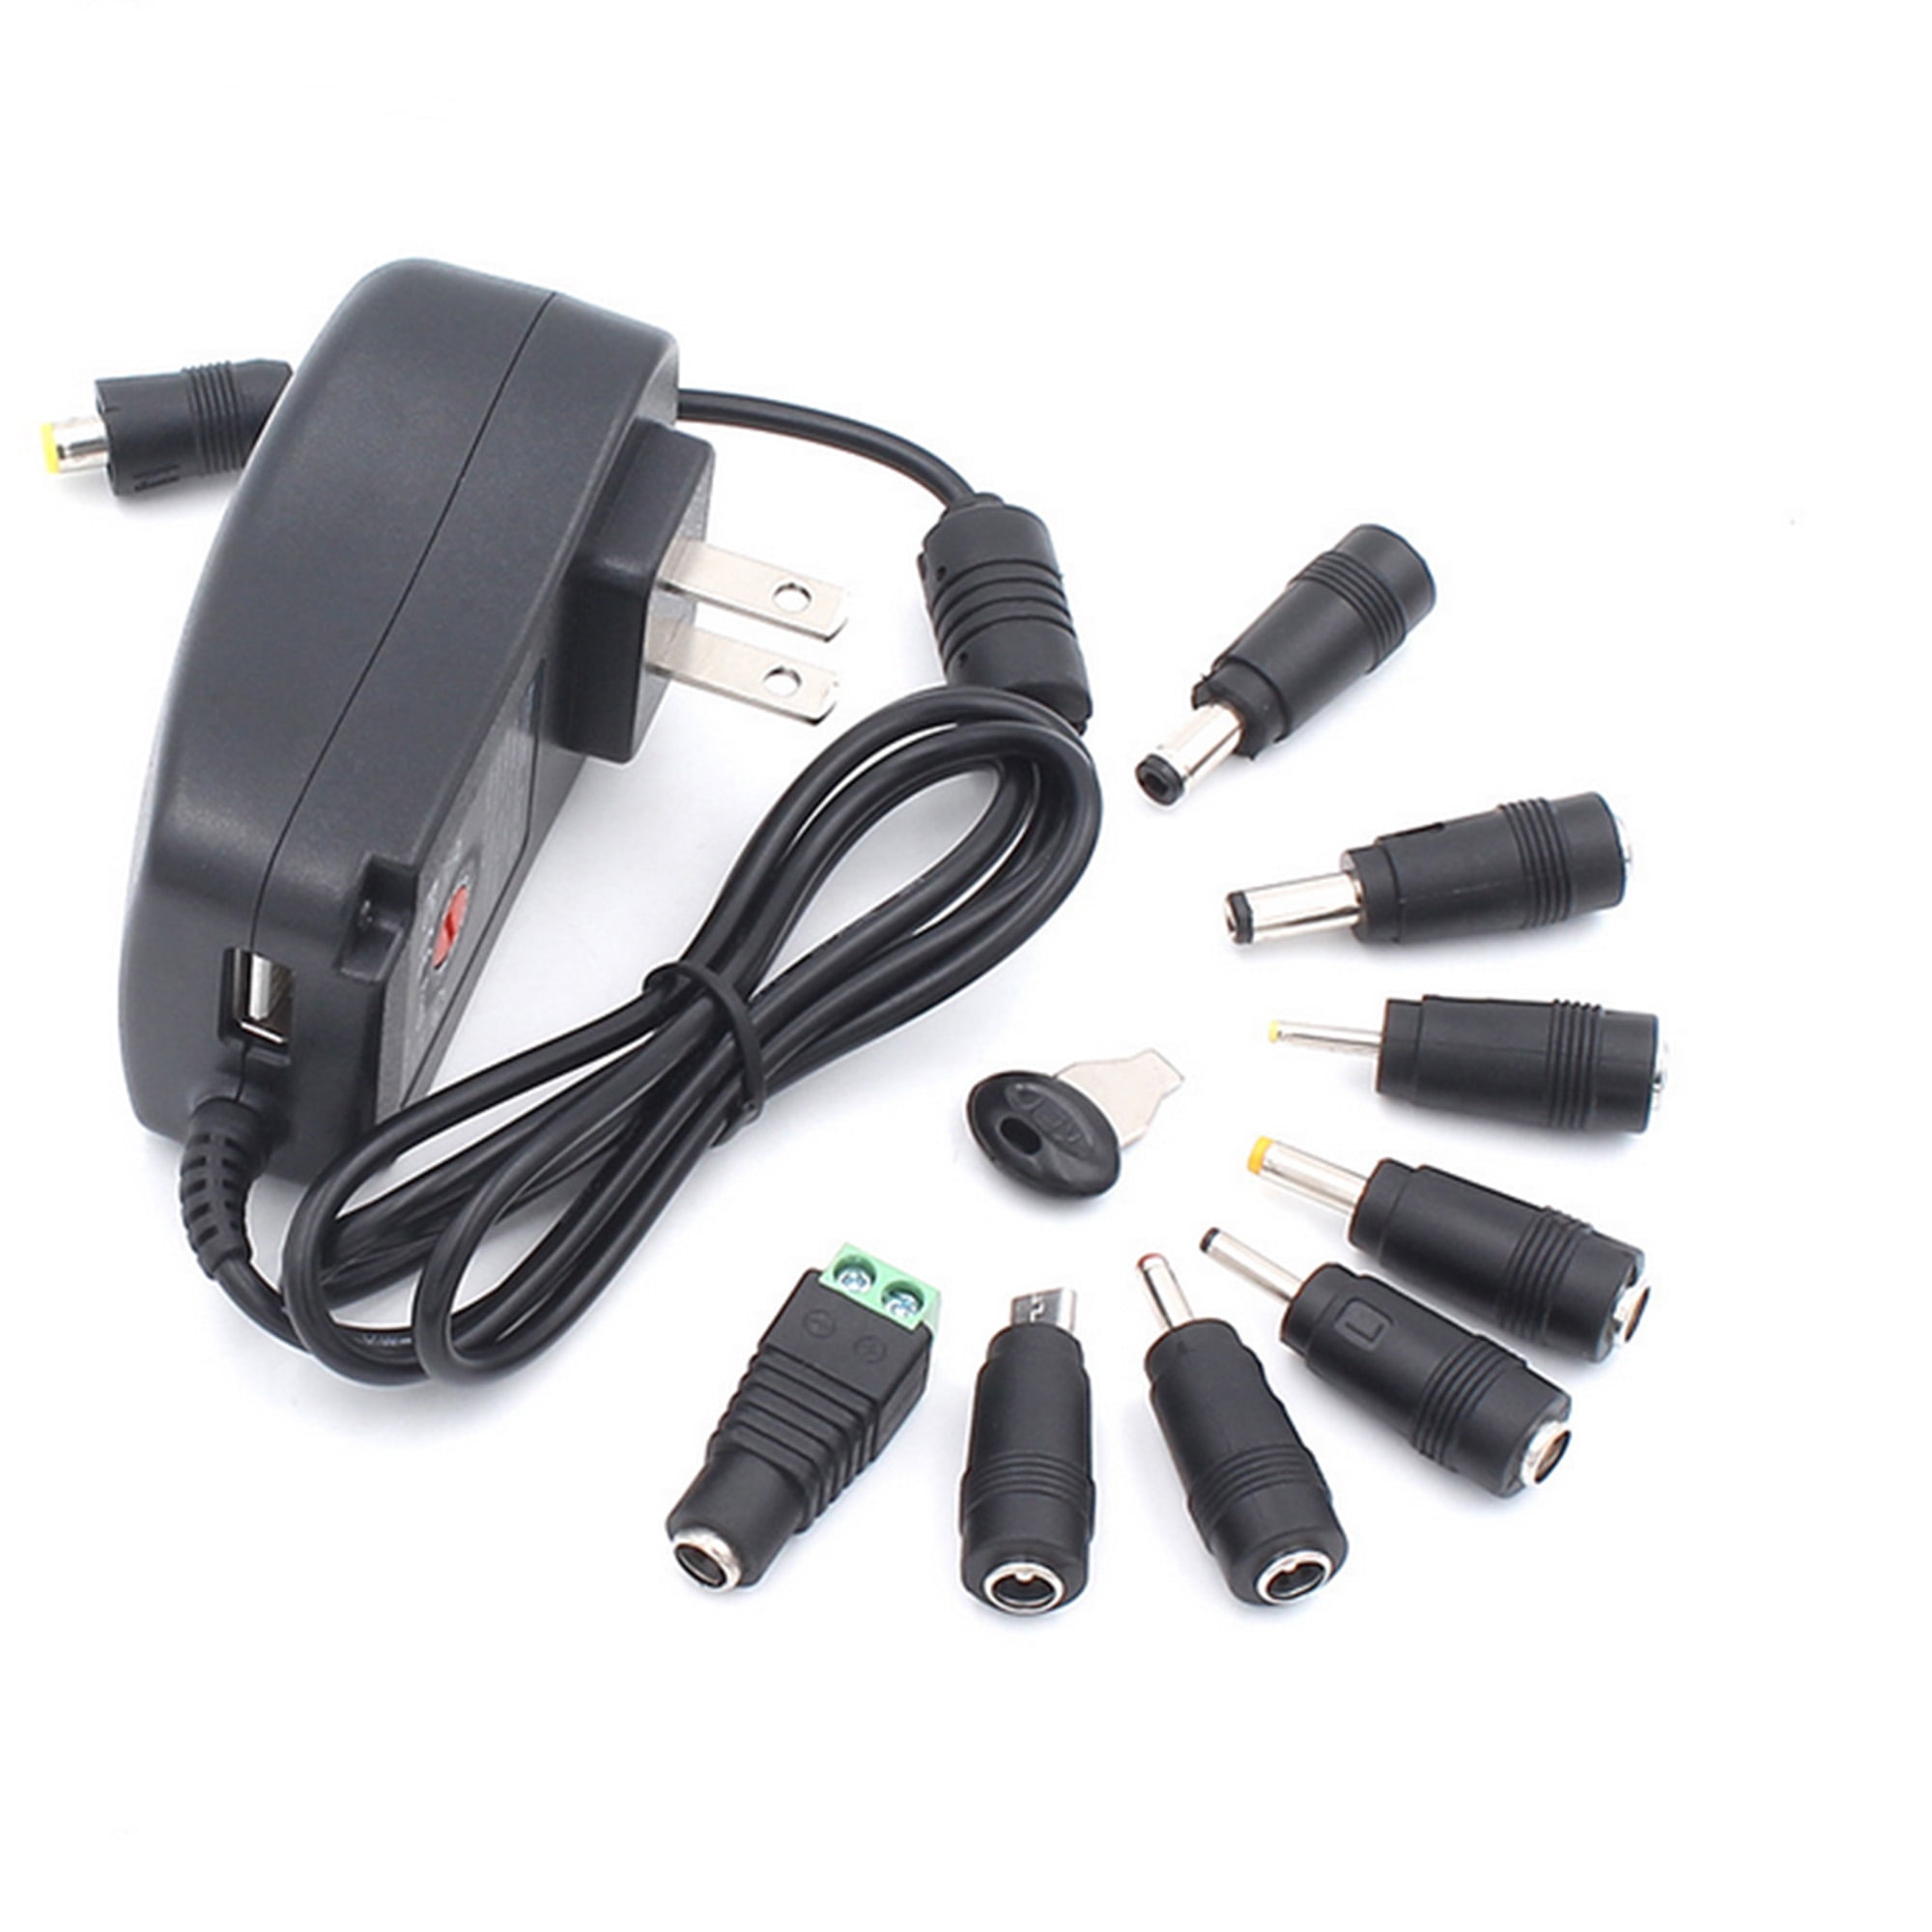 Suitable for Household Electronics/LED strip lights and More Adjustable Charger Power Supply DC 5V 9V 12V 15V 20V with 9 Connectors BENSN 36W Universal AC to DC Transformer Power Adapter Plug